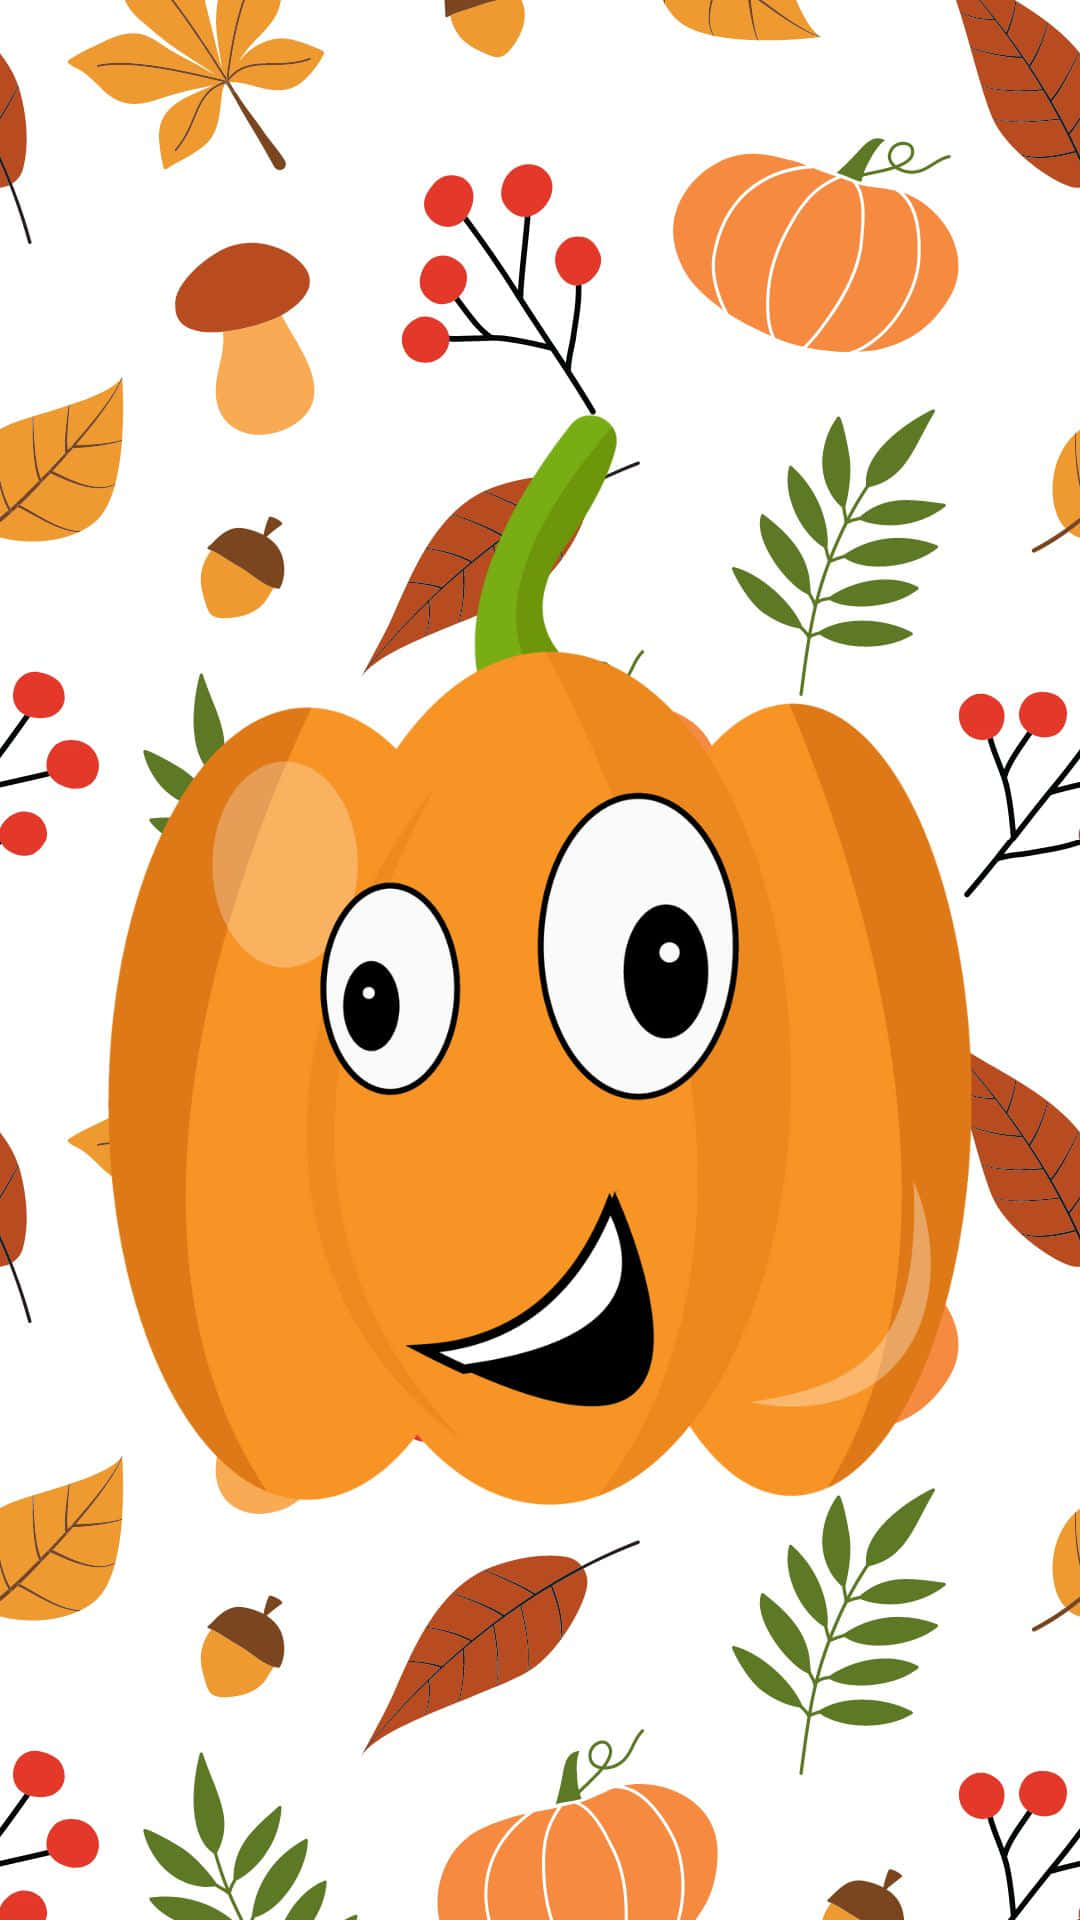 Adorable Pumpkin with Autumn Leaves Wallpaper